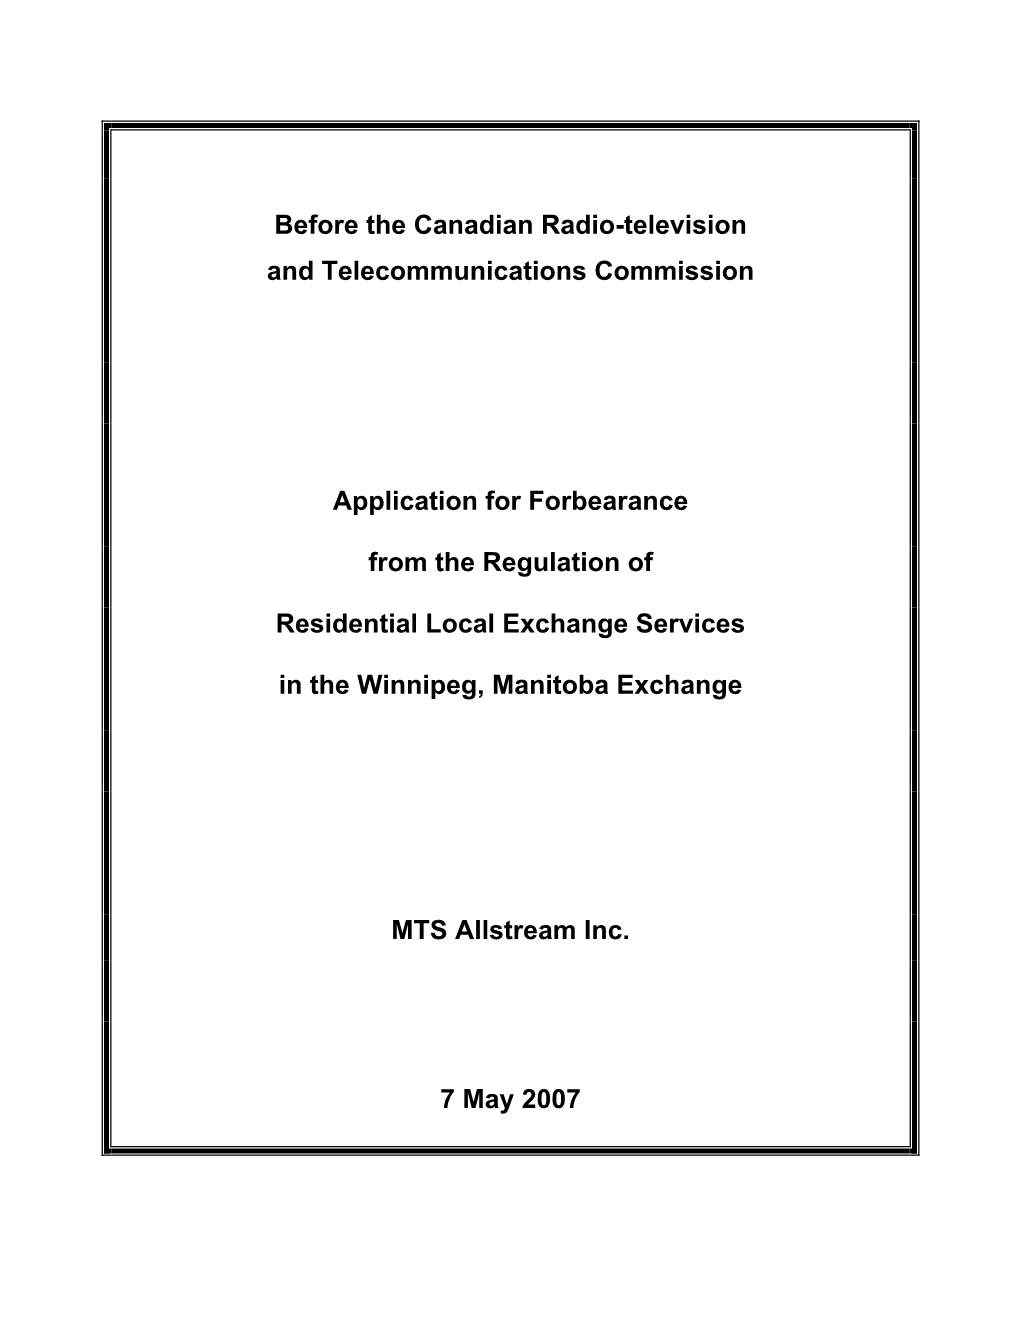 Before the Canadian Radio-Television and Telecommunications Commission Application for Forbearance from the Regulation Of